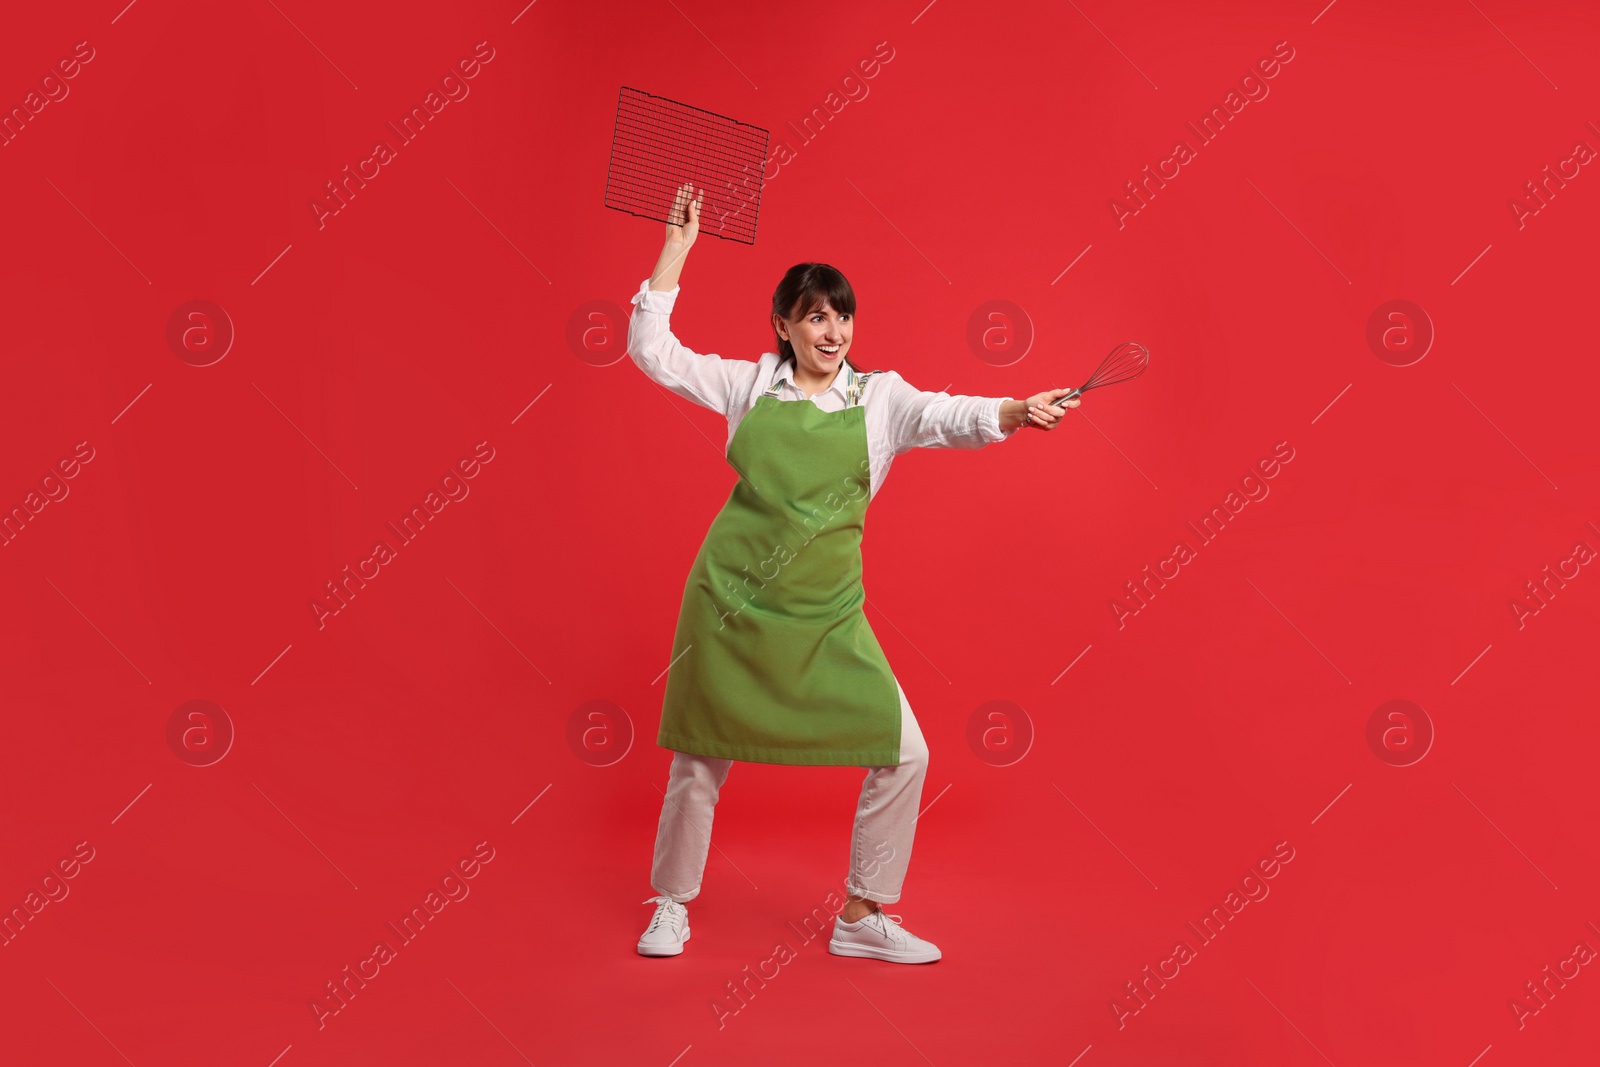 Photo of Happy confectioner in apron holding professional whisk and cooling rack on red background